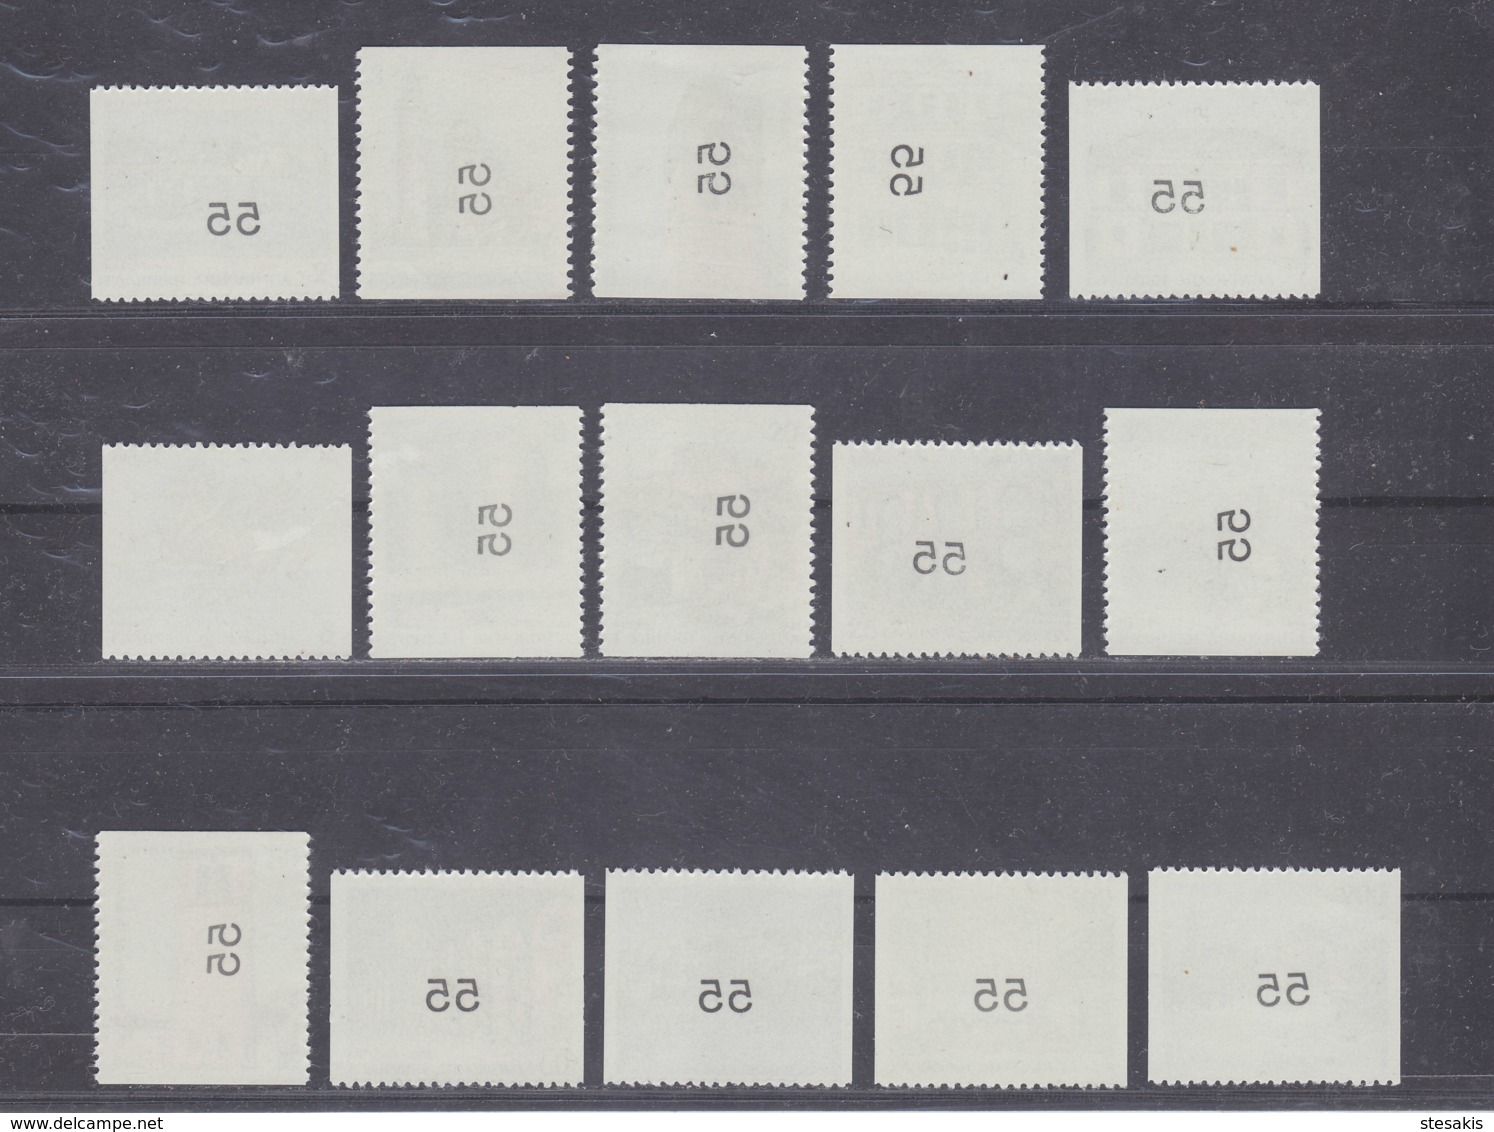 GREECE 1988 - Capitals Of Prefectures  / MNH - Unused Stamps